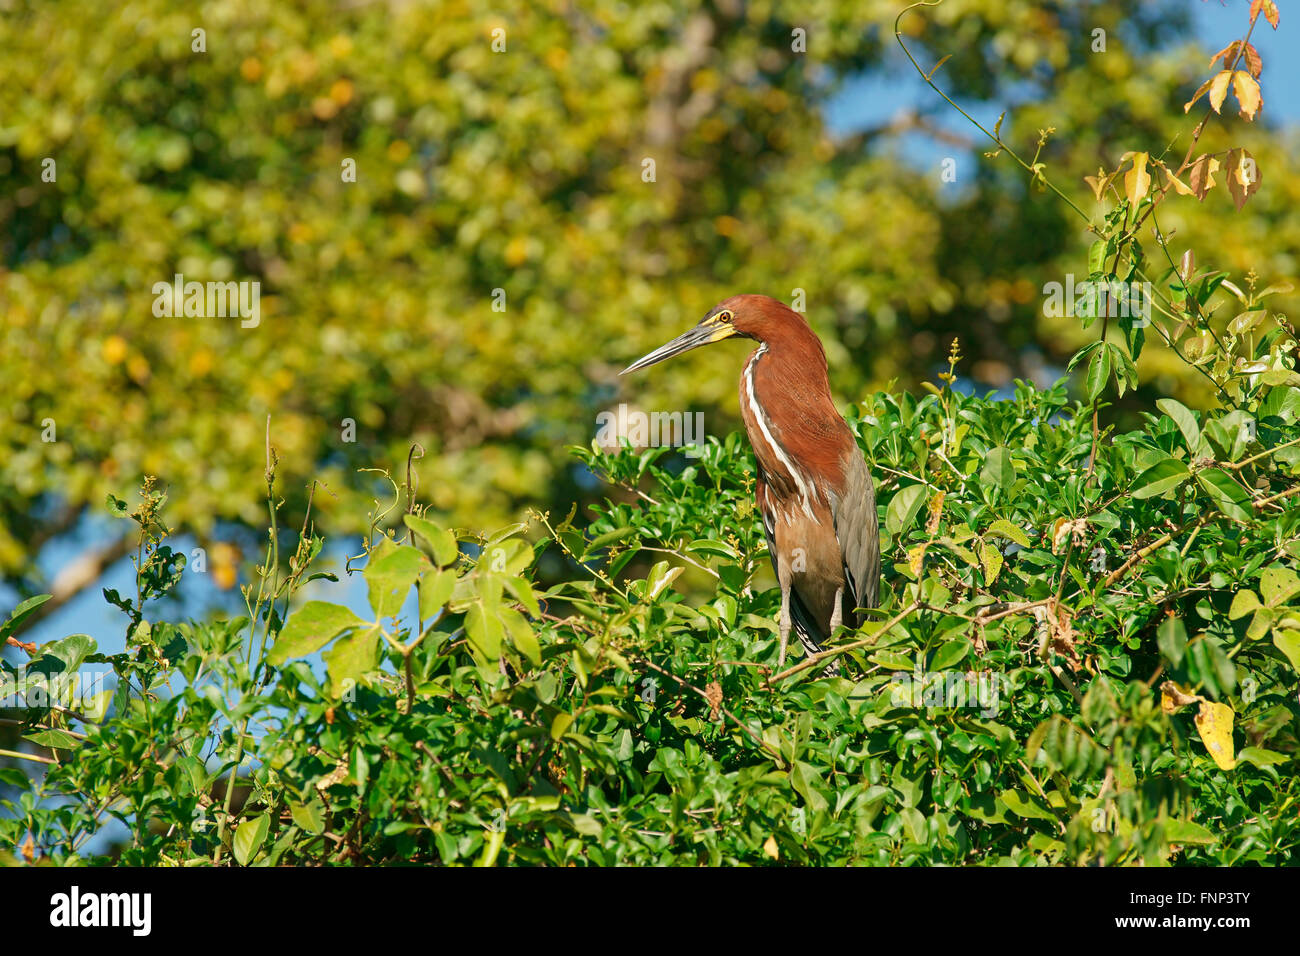 Rufescent tiger heron (Tigrisoma lineatum) sitting on tree, Pantanal, Brésil Banque D'Images